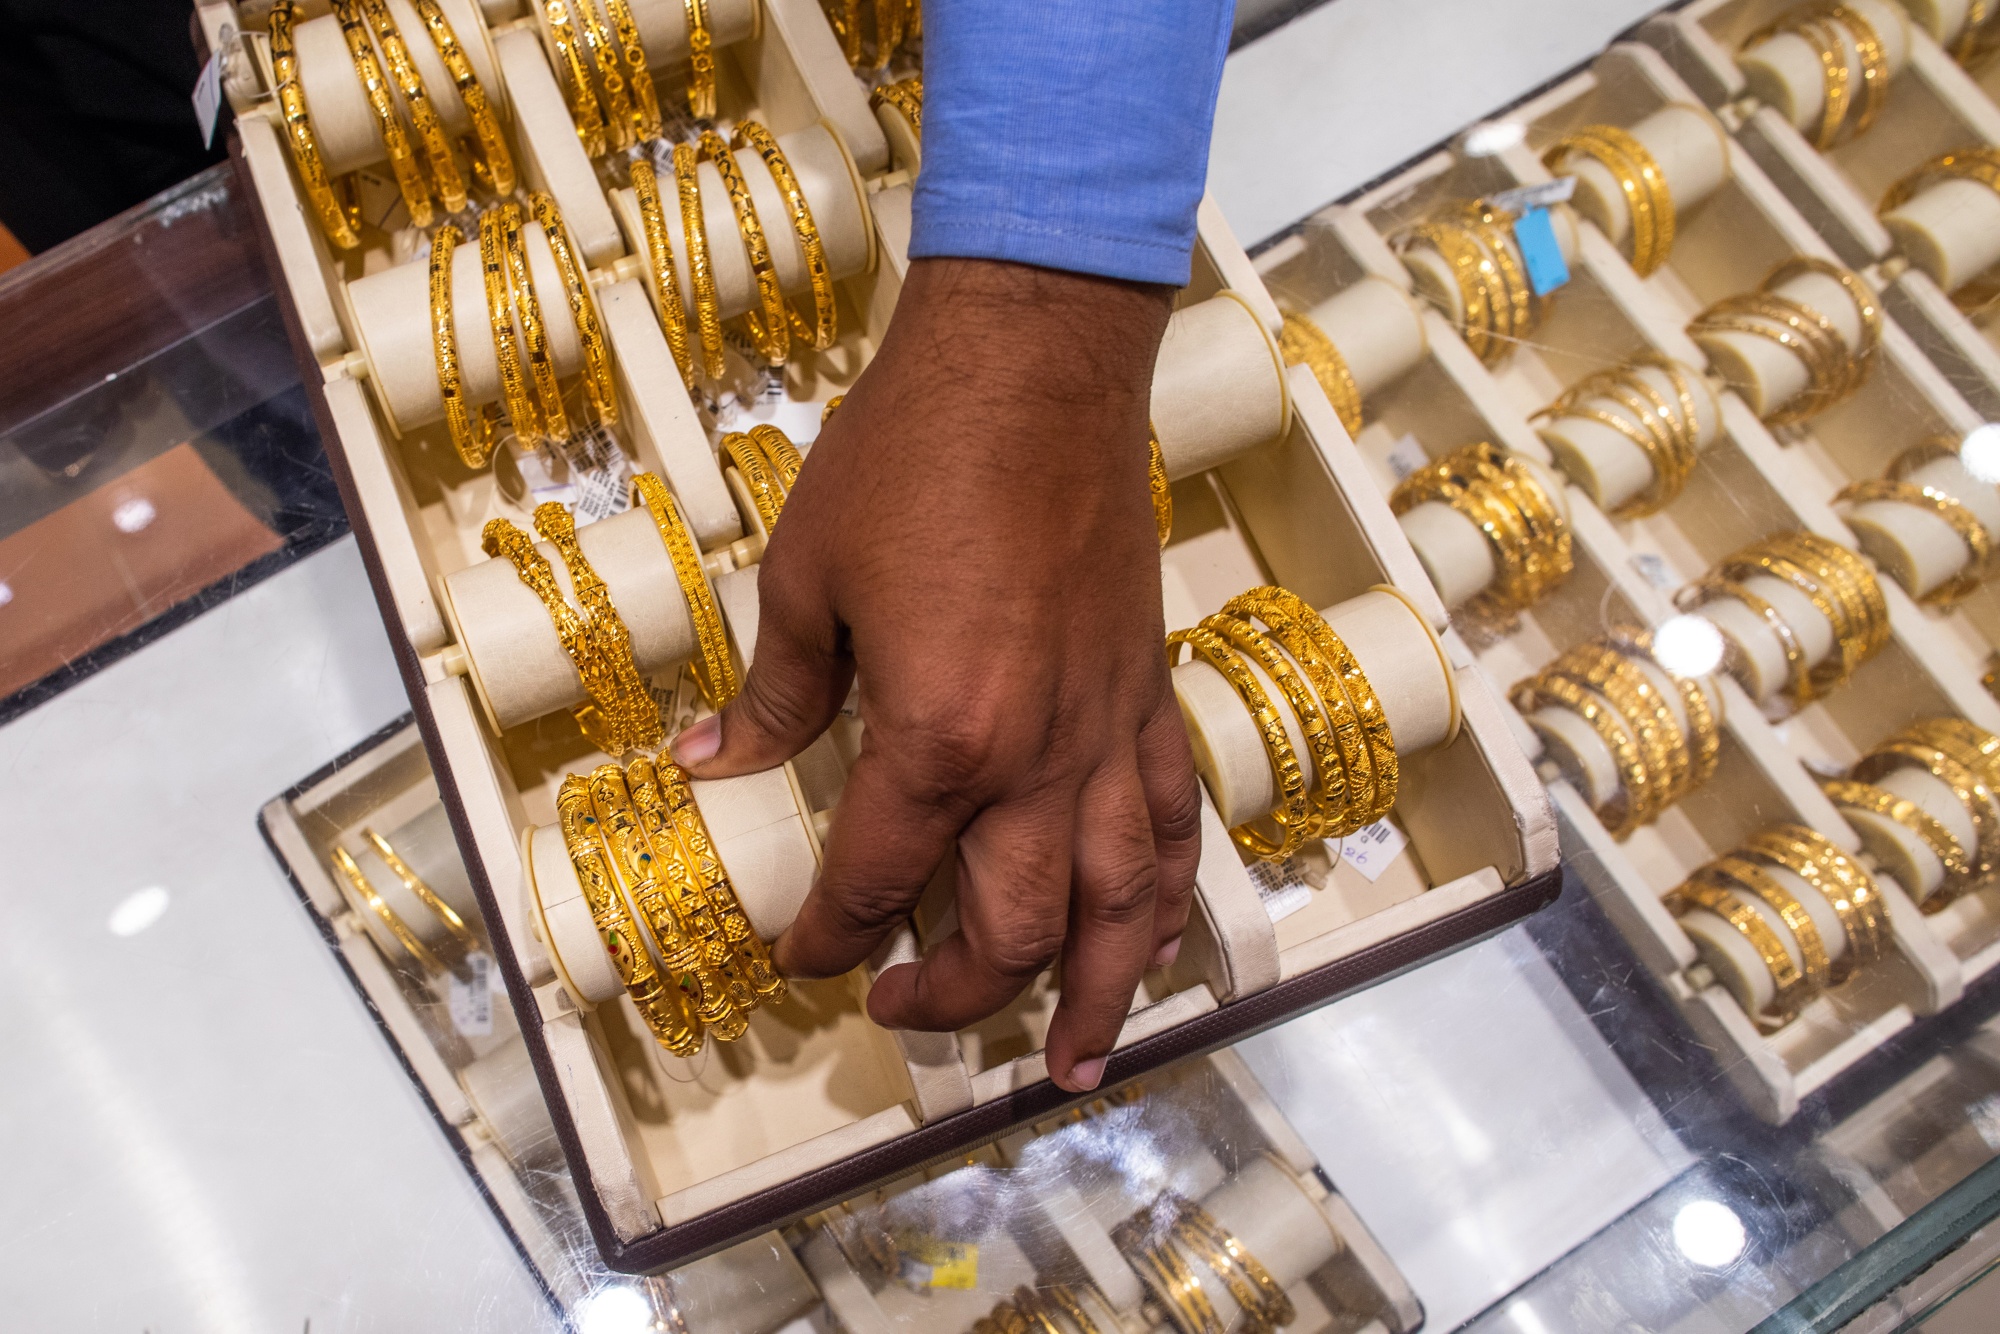 $10,000 Gold: Why Gold's Inevitable Rise Is the Investor's Safe Haven